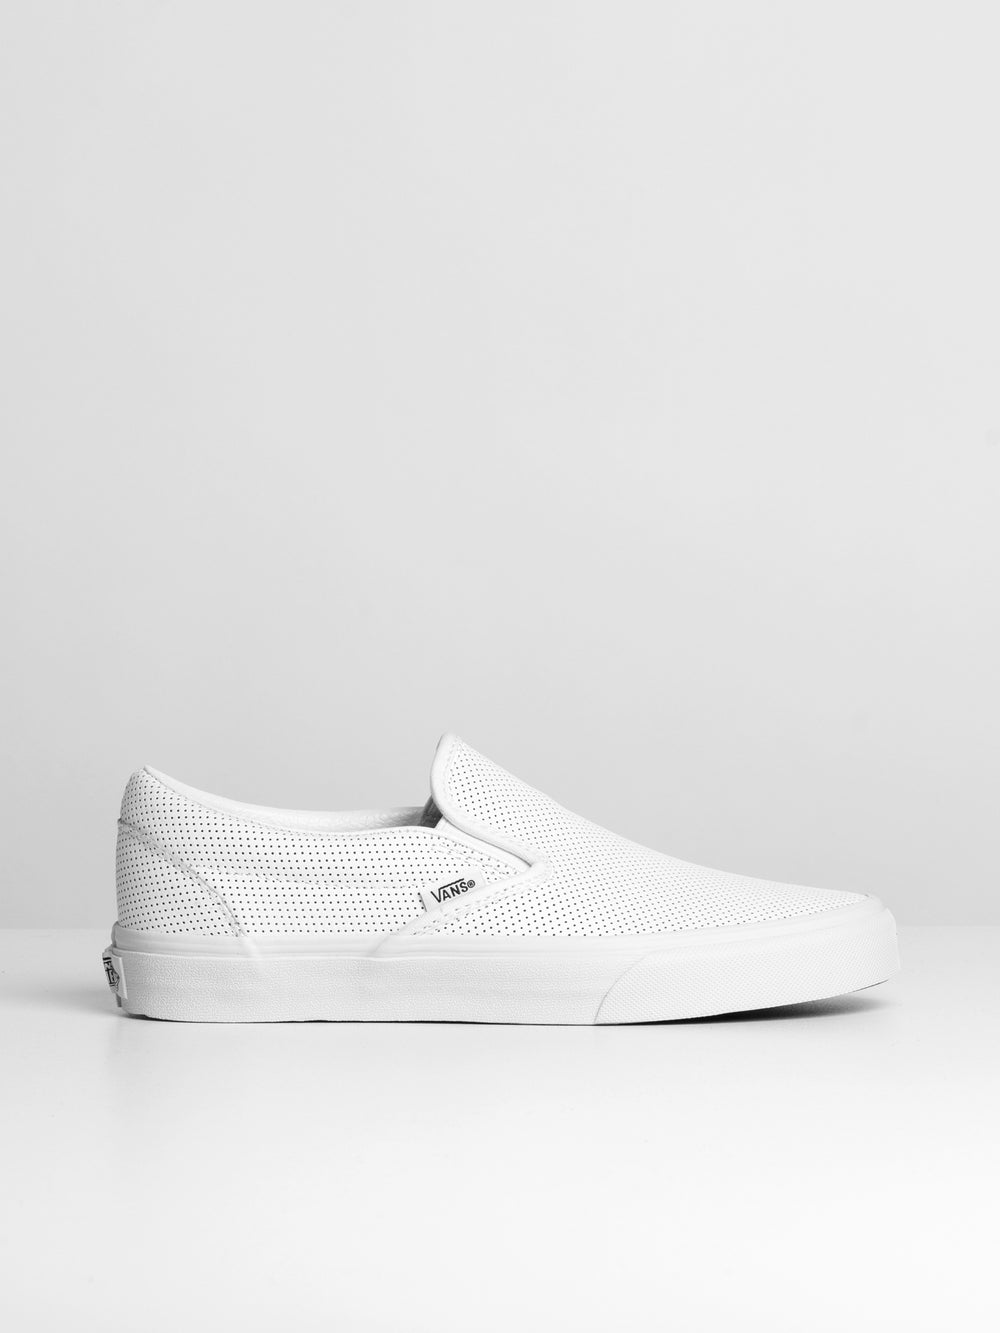 WOMENS VANS PERF LEATHER SLIP-ON  - CLEARANCE